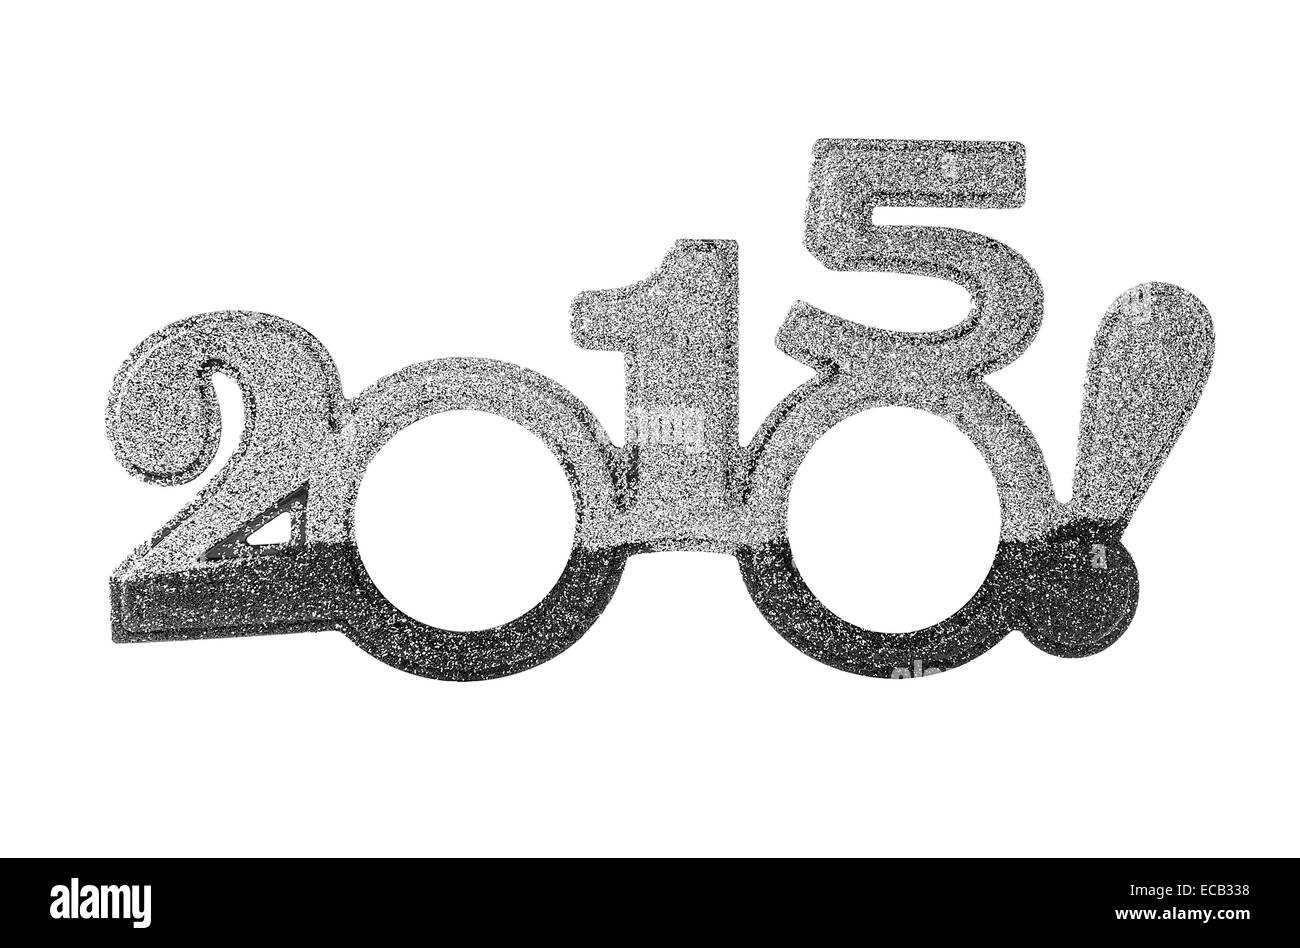 Happy New 2015 year in silver tones. Stock Photo